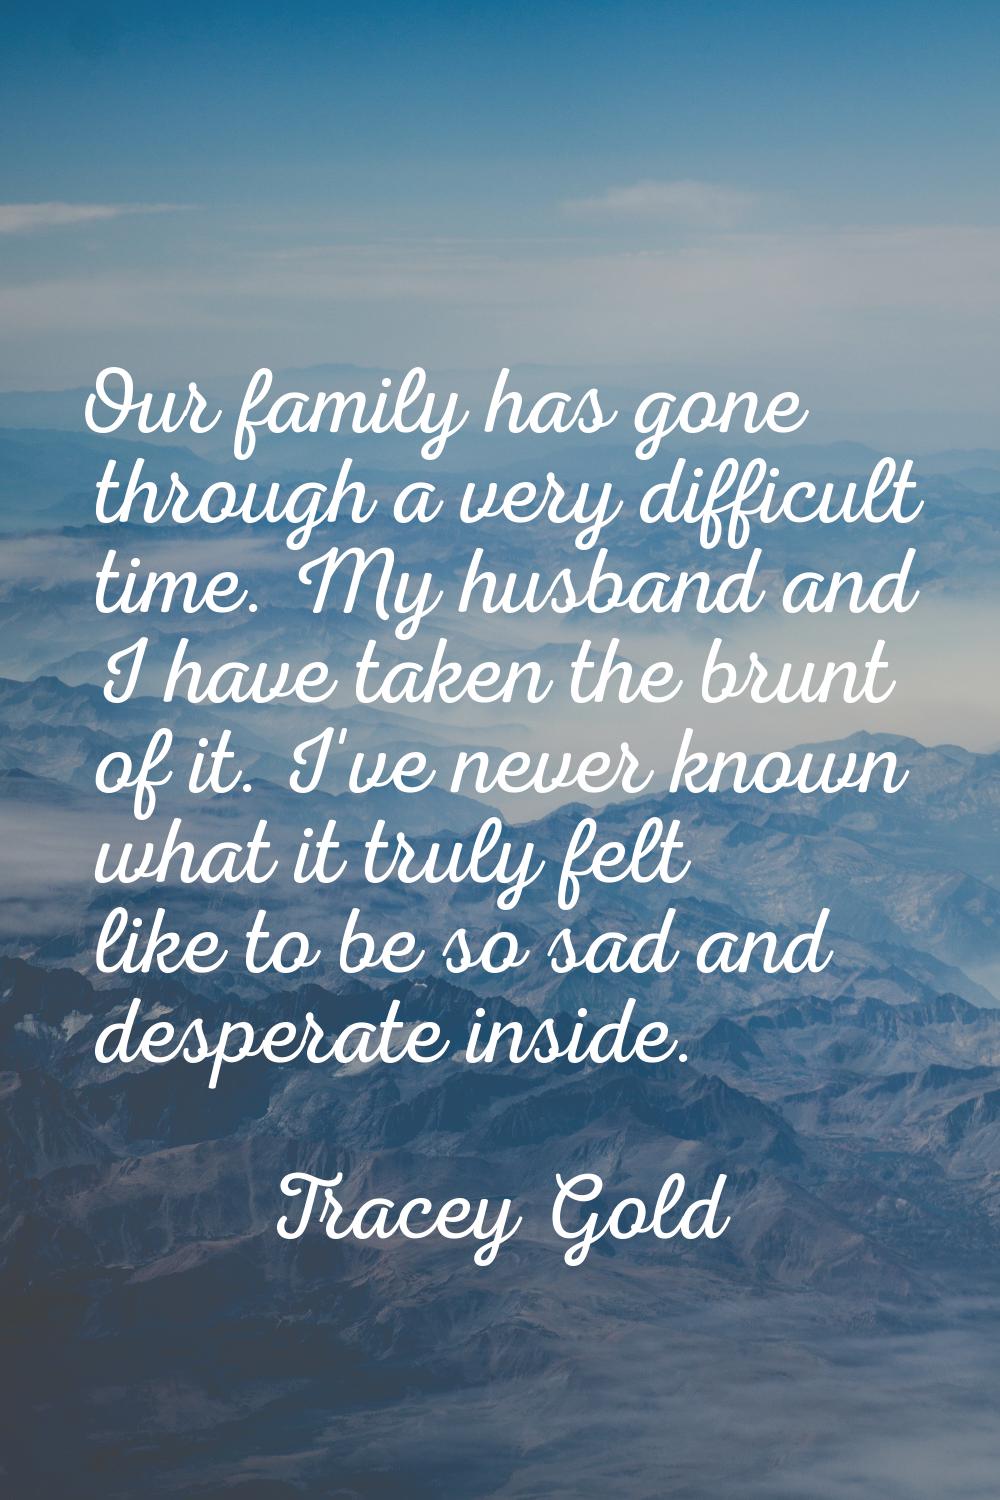 Our family has gone through a very difficult time. My husband and I have taken the brunt of it. I'v